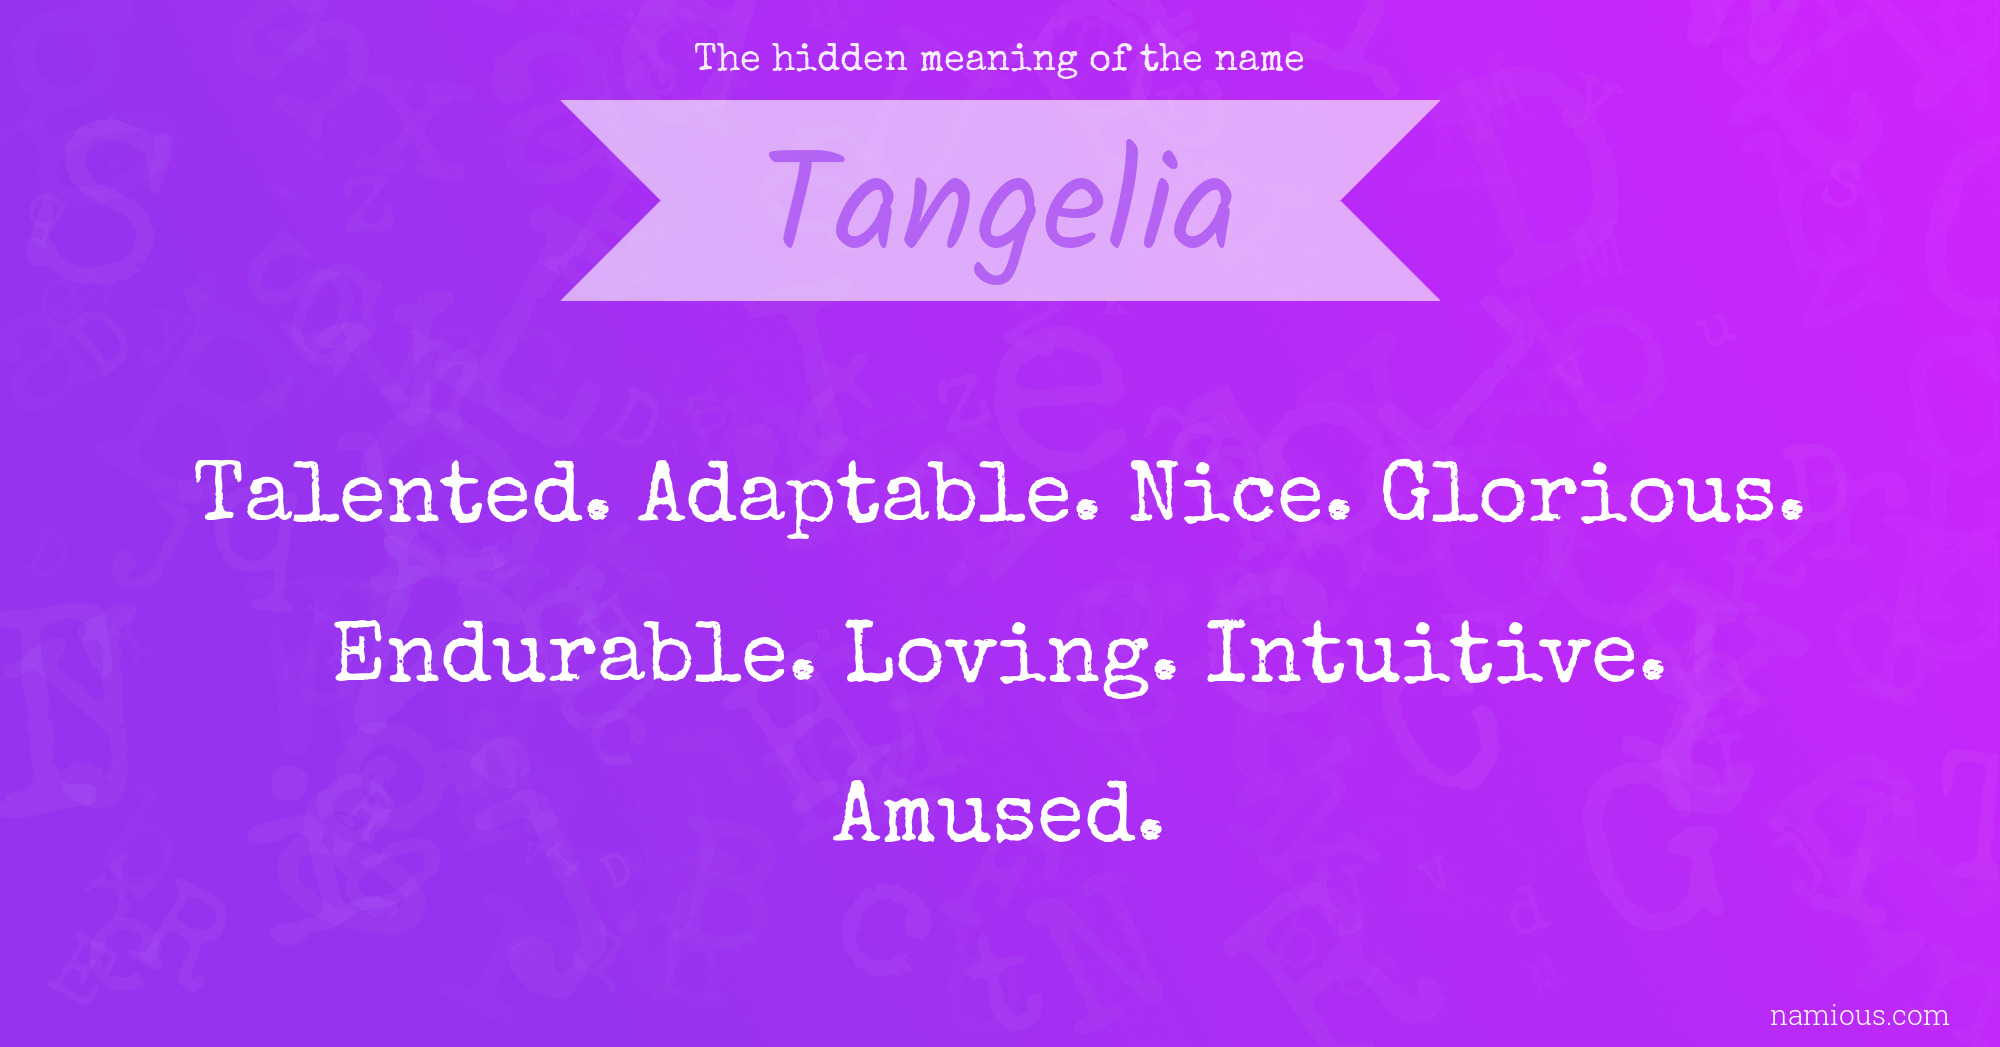 The hidden meaning of the name Tangelia